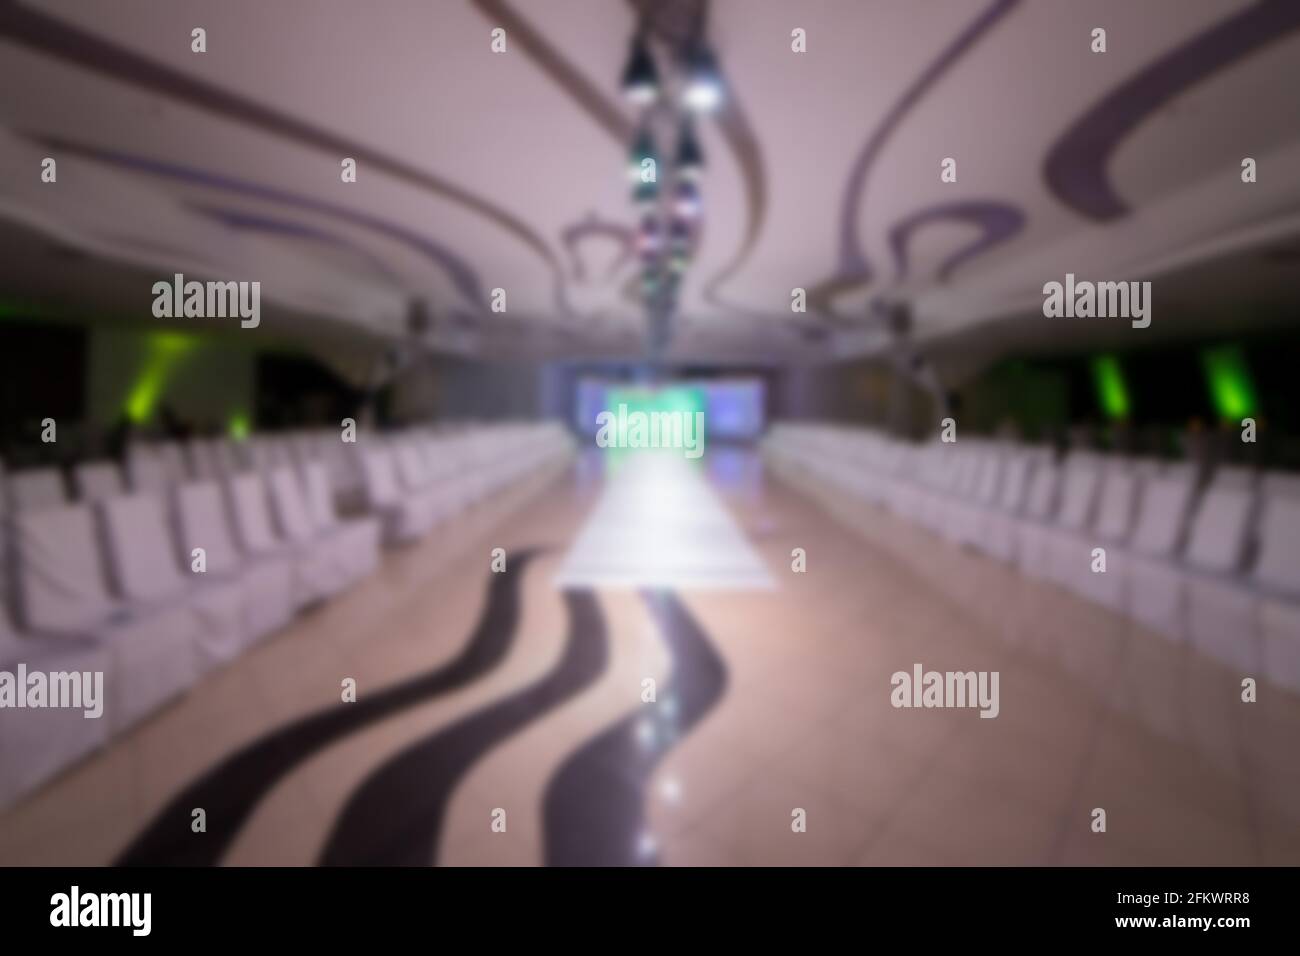 Empty Fashion Show Stage With Runway. Stock Photo, Picture and Royalty Free  Image. Image 8238837.